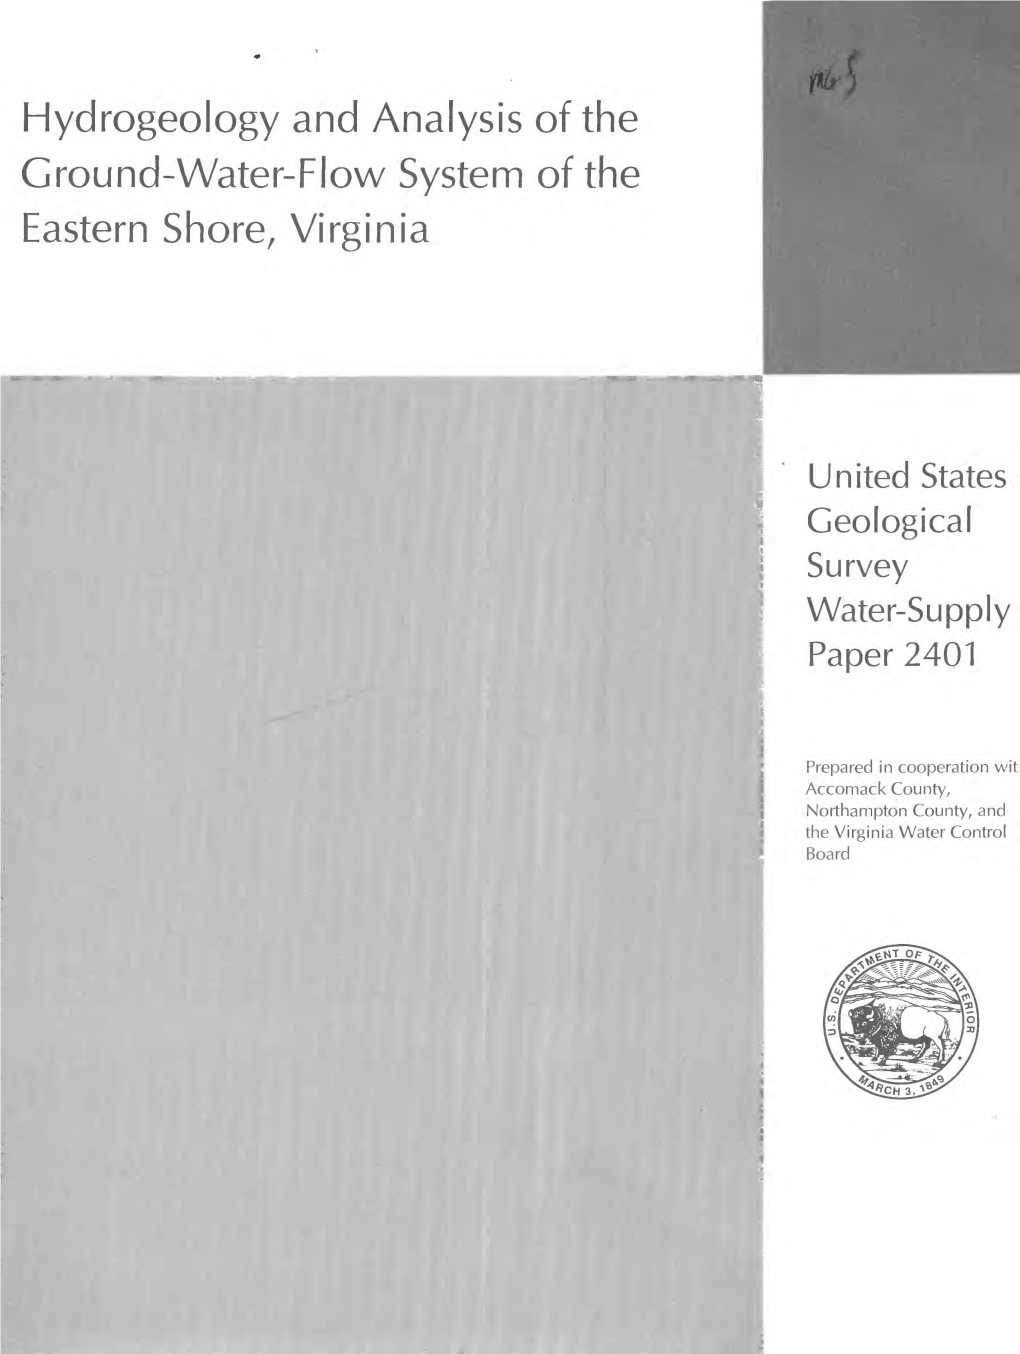 Hydrogeology and Analysis of the Ground-Water-Flow System of the Eastern Shore, Virginia